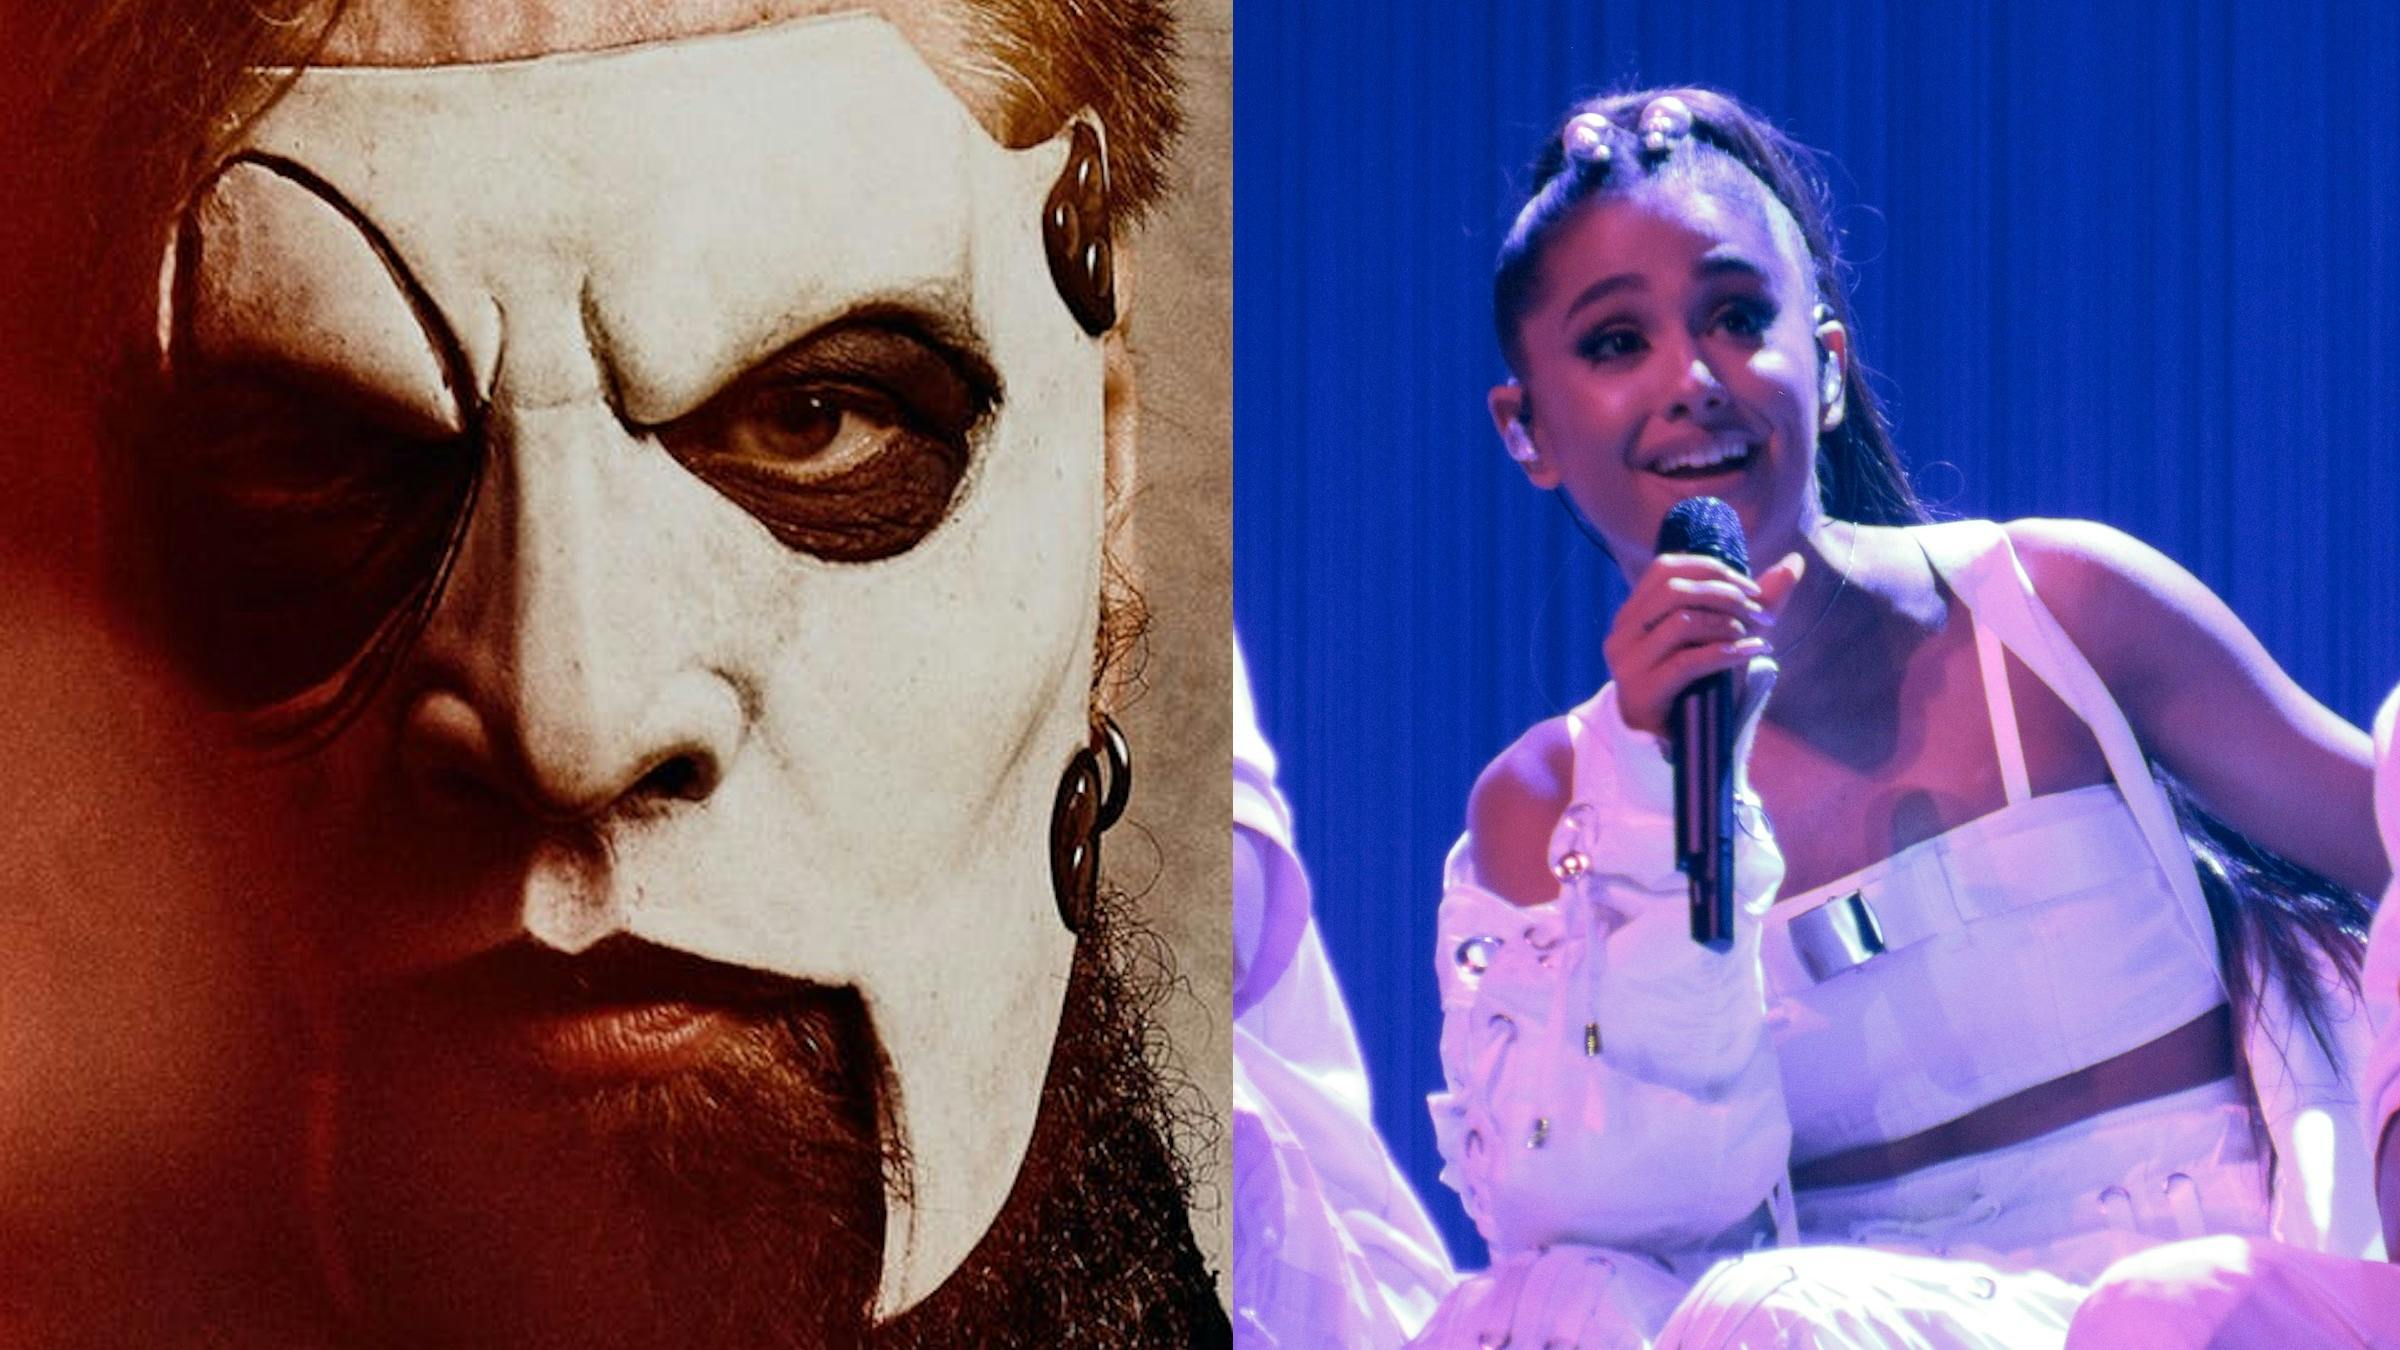 Slipknot's Jim Root Loves Pop Music, Had His "Mind Blown" By Ariana Grande